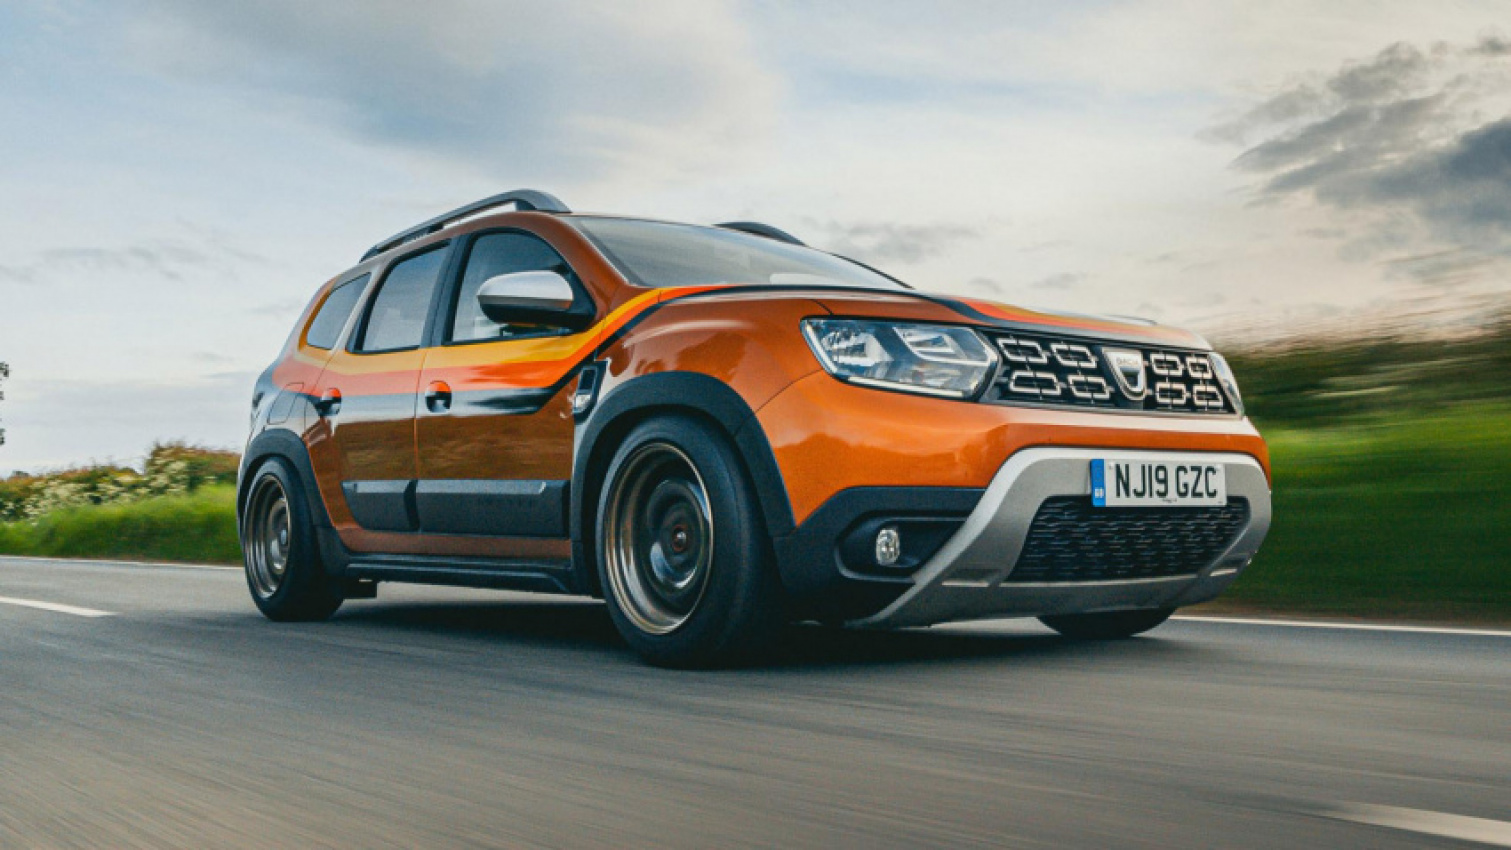 autos, cars, garage, meet the knuckle duster, our dacia project car